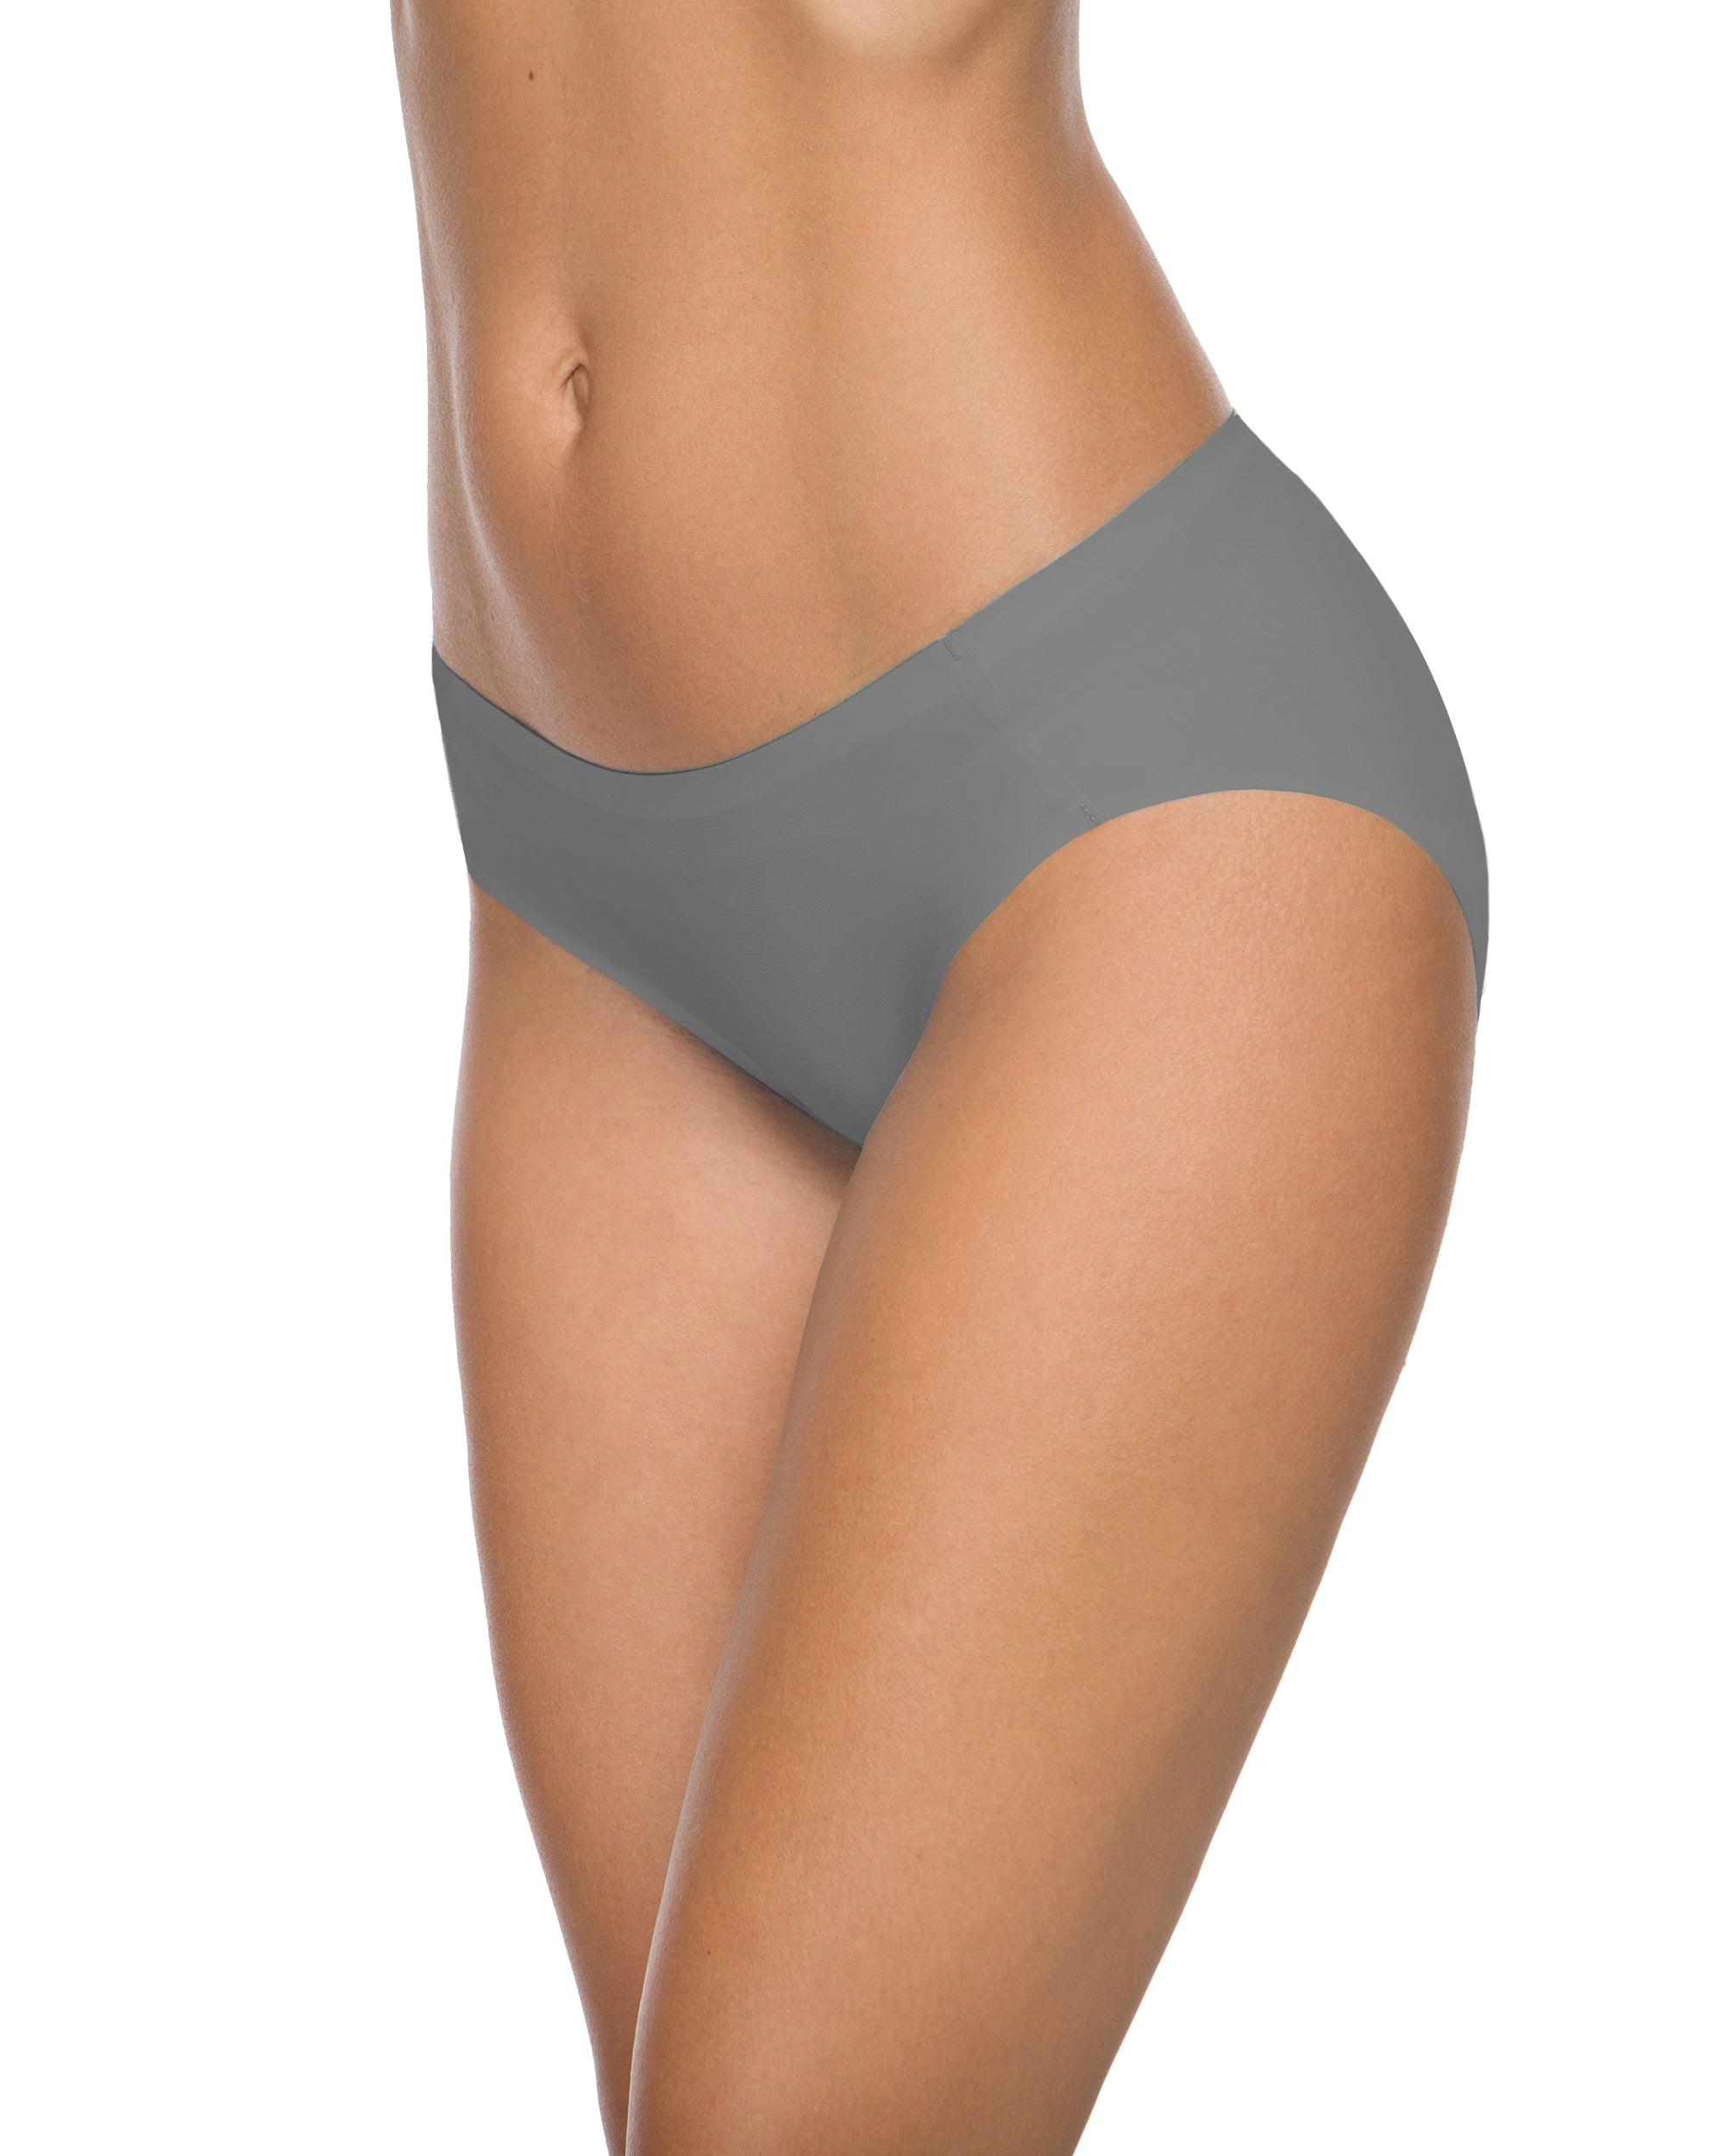 Shapyfy Super Comfy Seamless Women's Panty, Soft Material